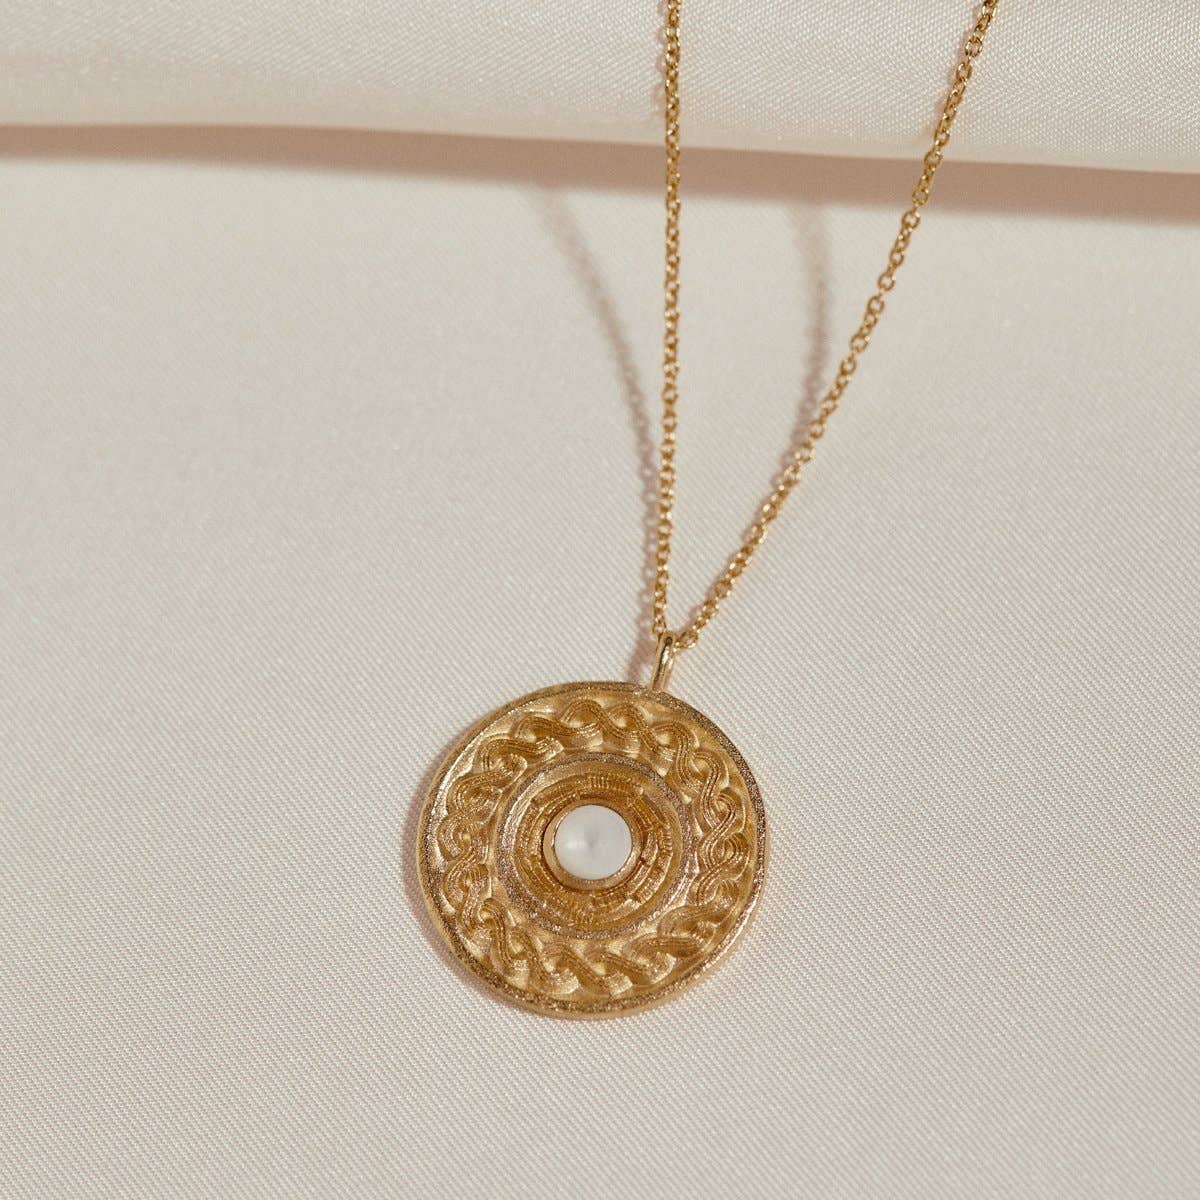 Alopé Necklace | Jewelry Gold Gift Waterproof